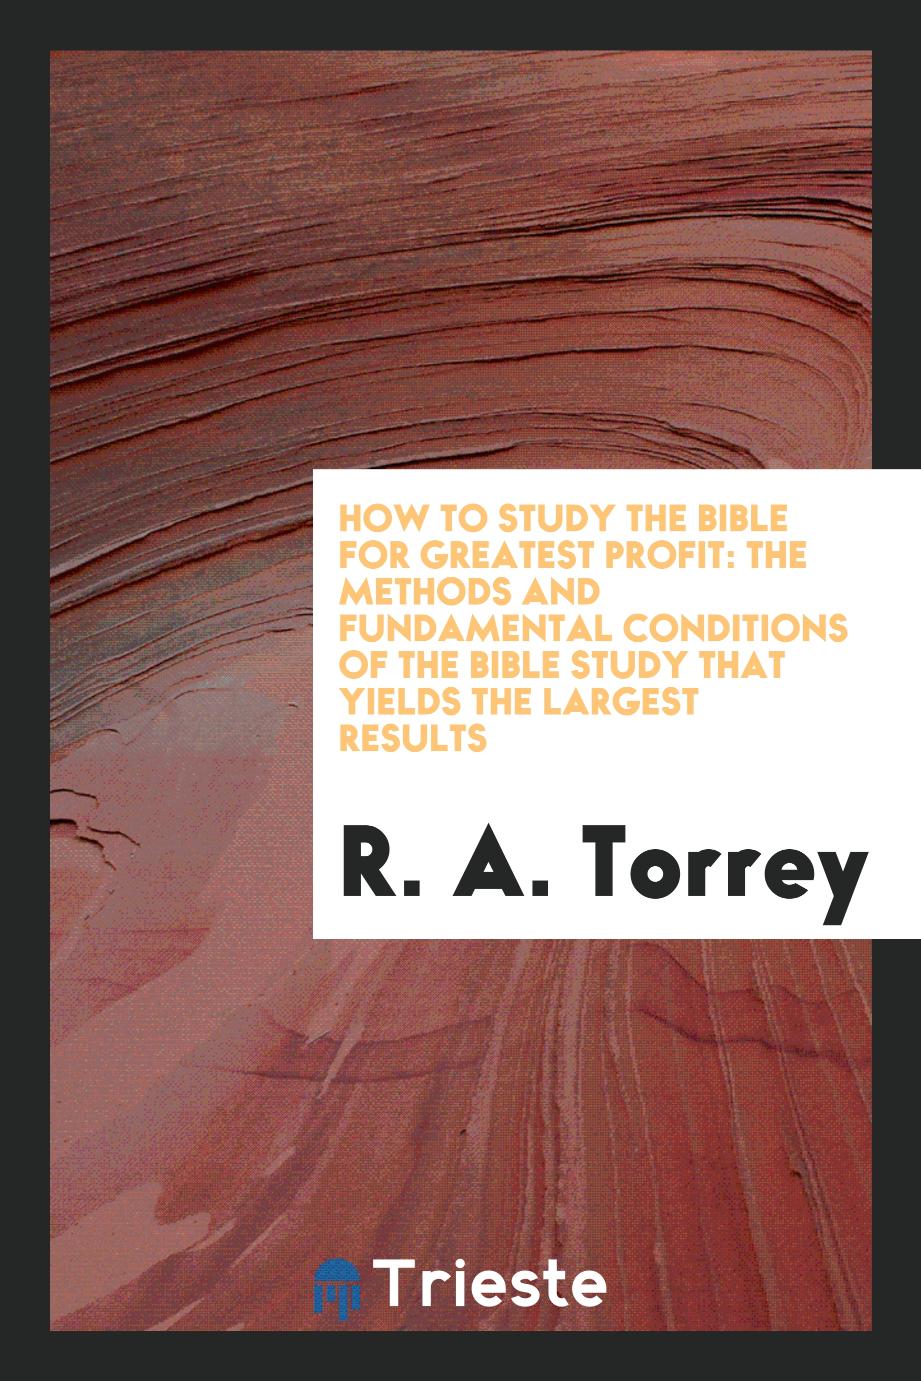 How to Study the Bible for Greatest Profit: The Methods and Fundamental Conditions of the Bible Study That Yields the Largest Results